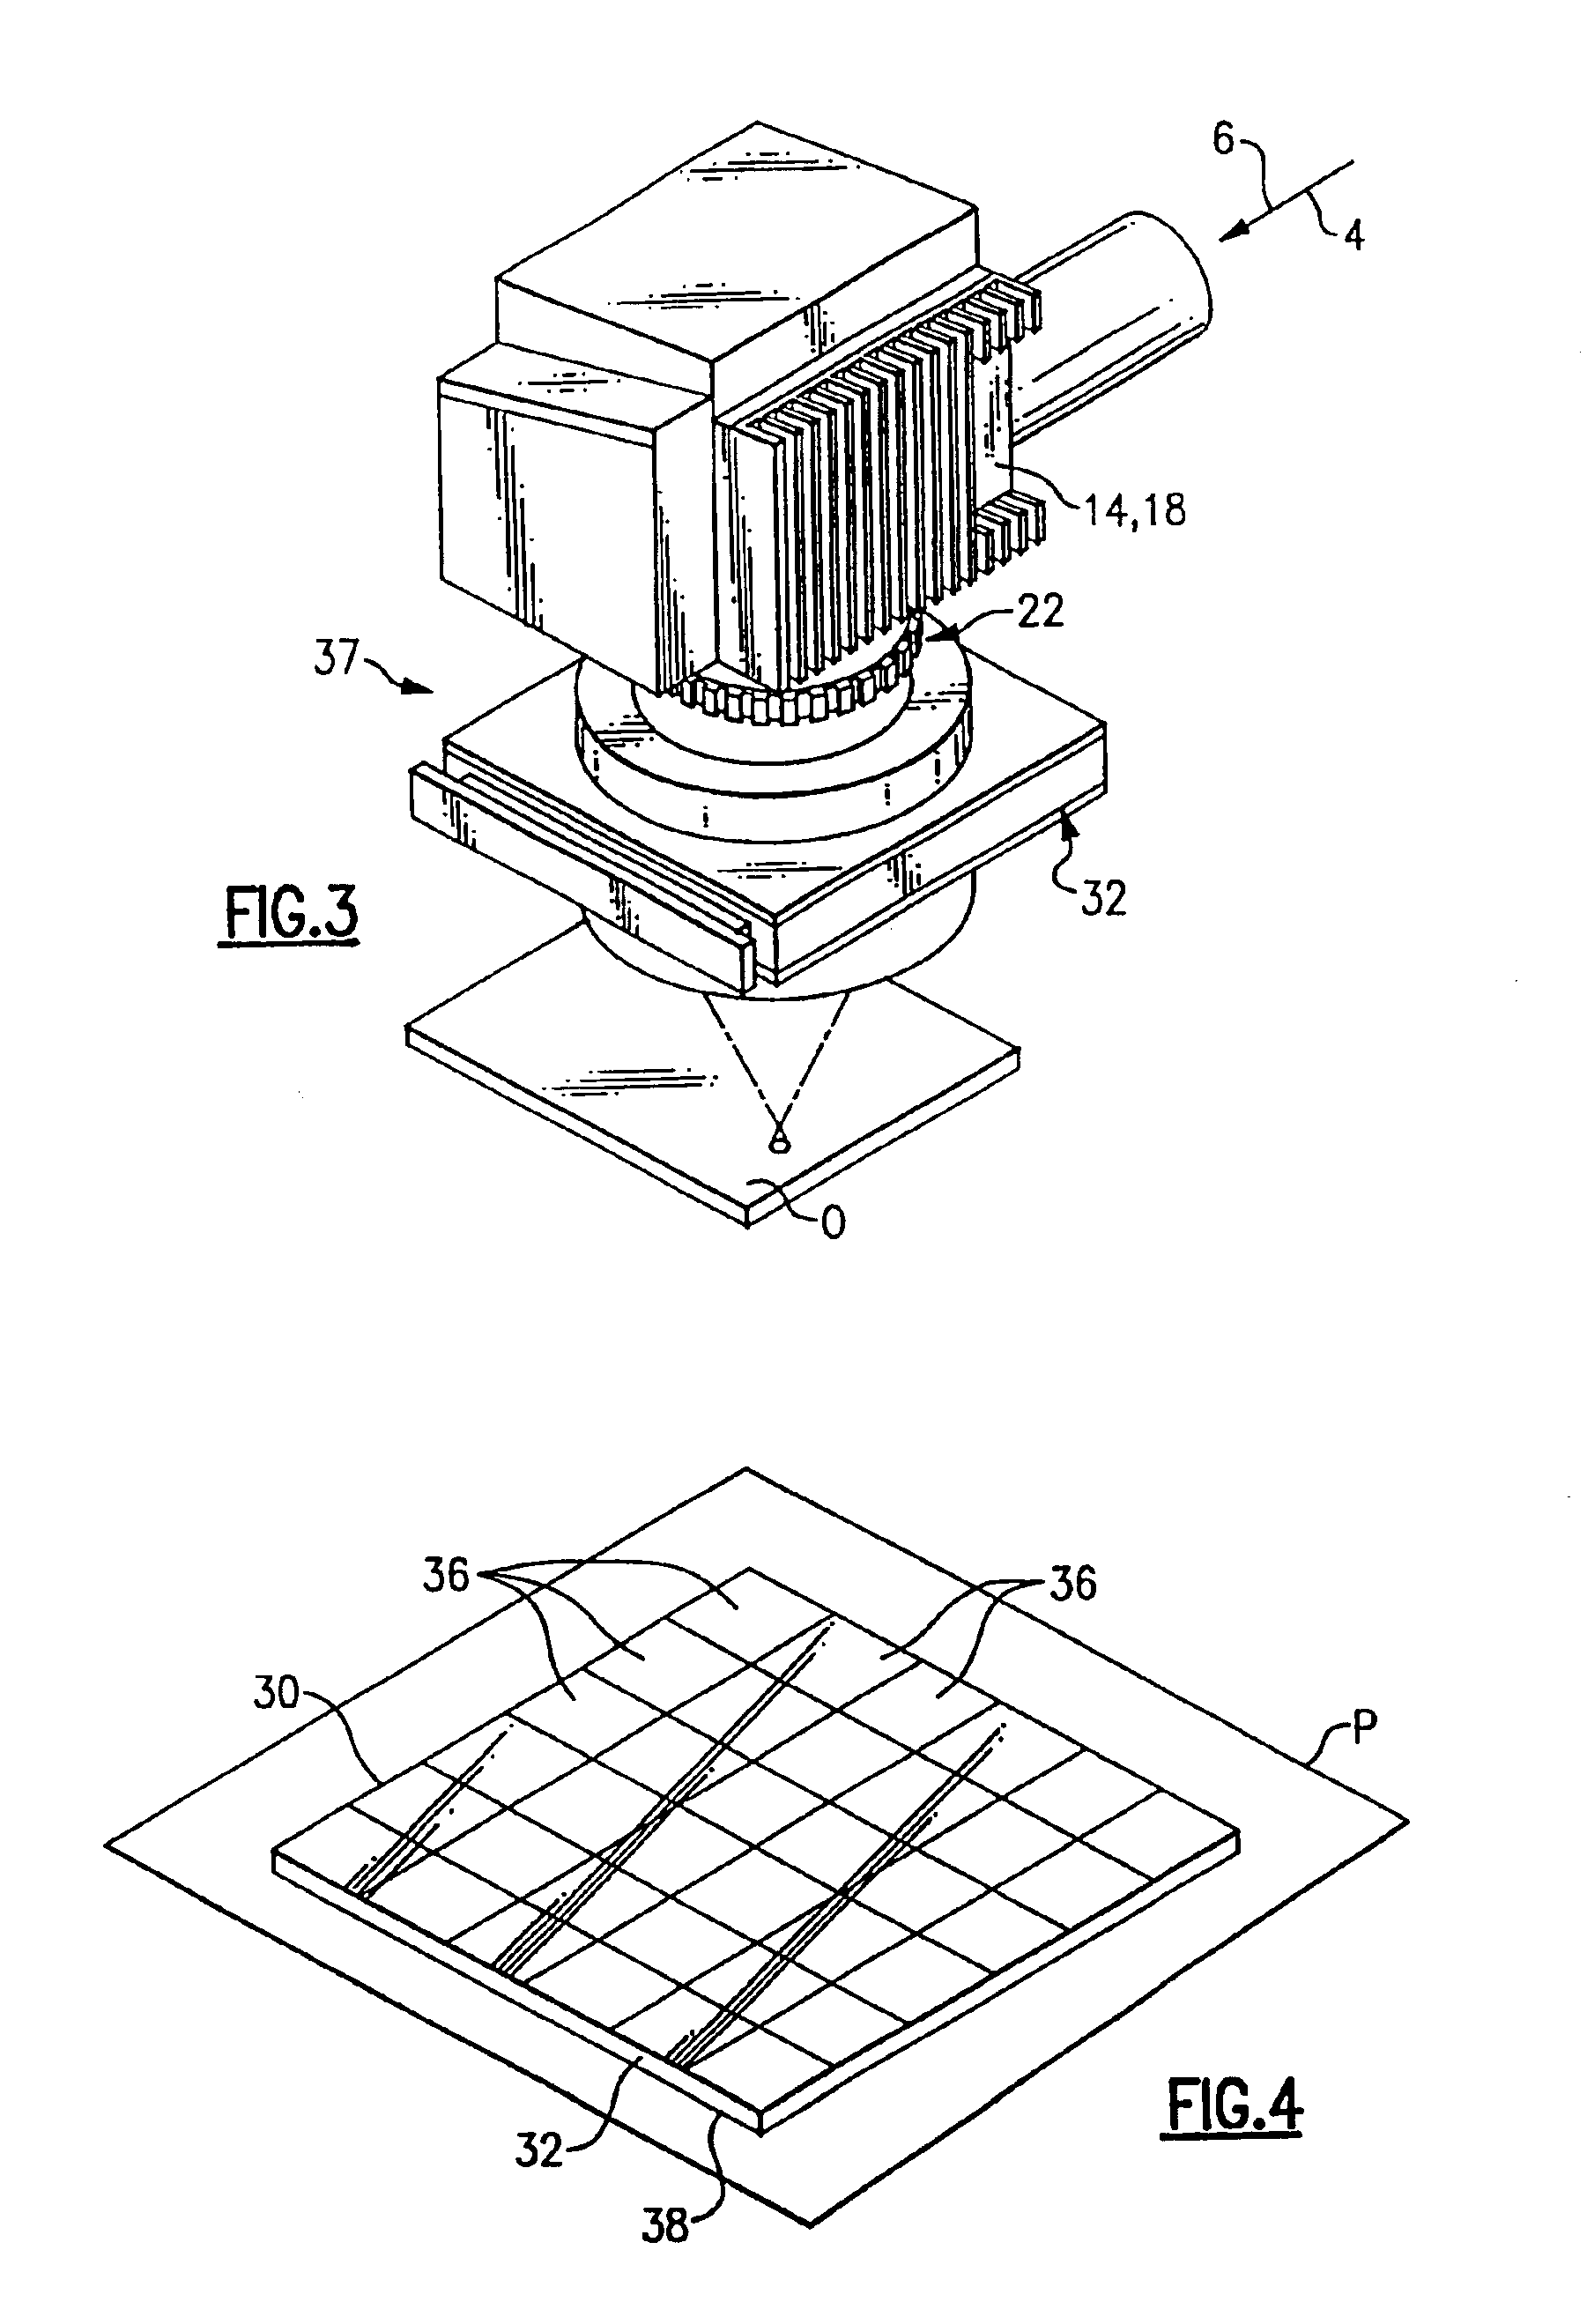 Firearm microstamping and micromarking insert for stamping a firearm identification code and serial number into cartridge shell casings and projectiles